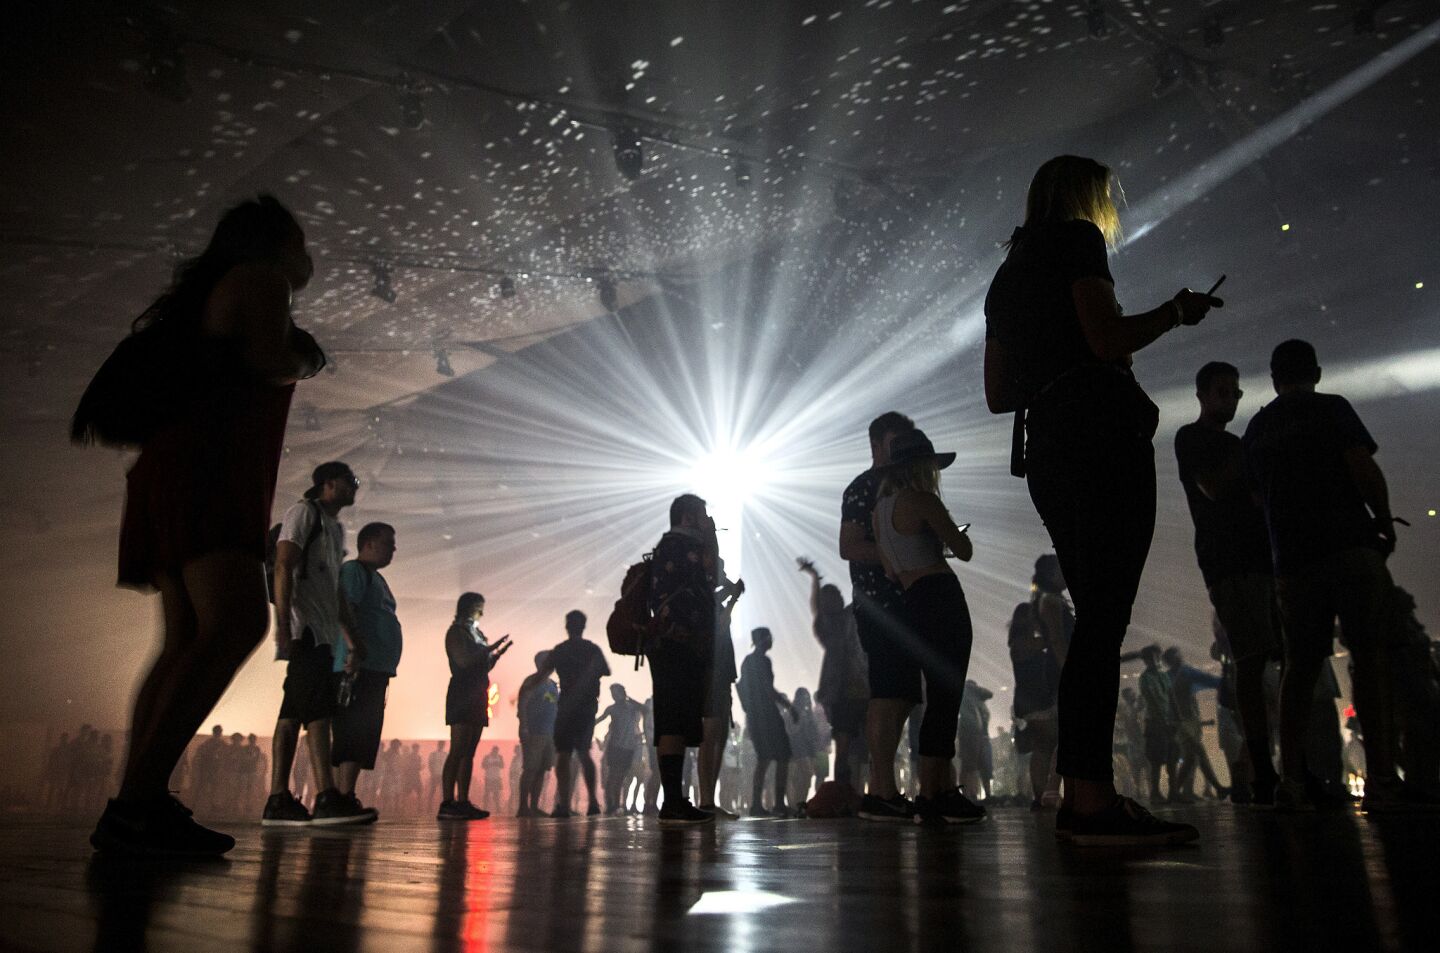 Festivalgoers groove in the Yuma tent at Coachella.